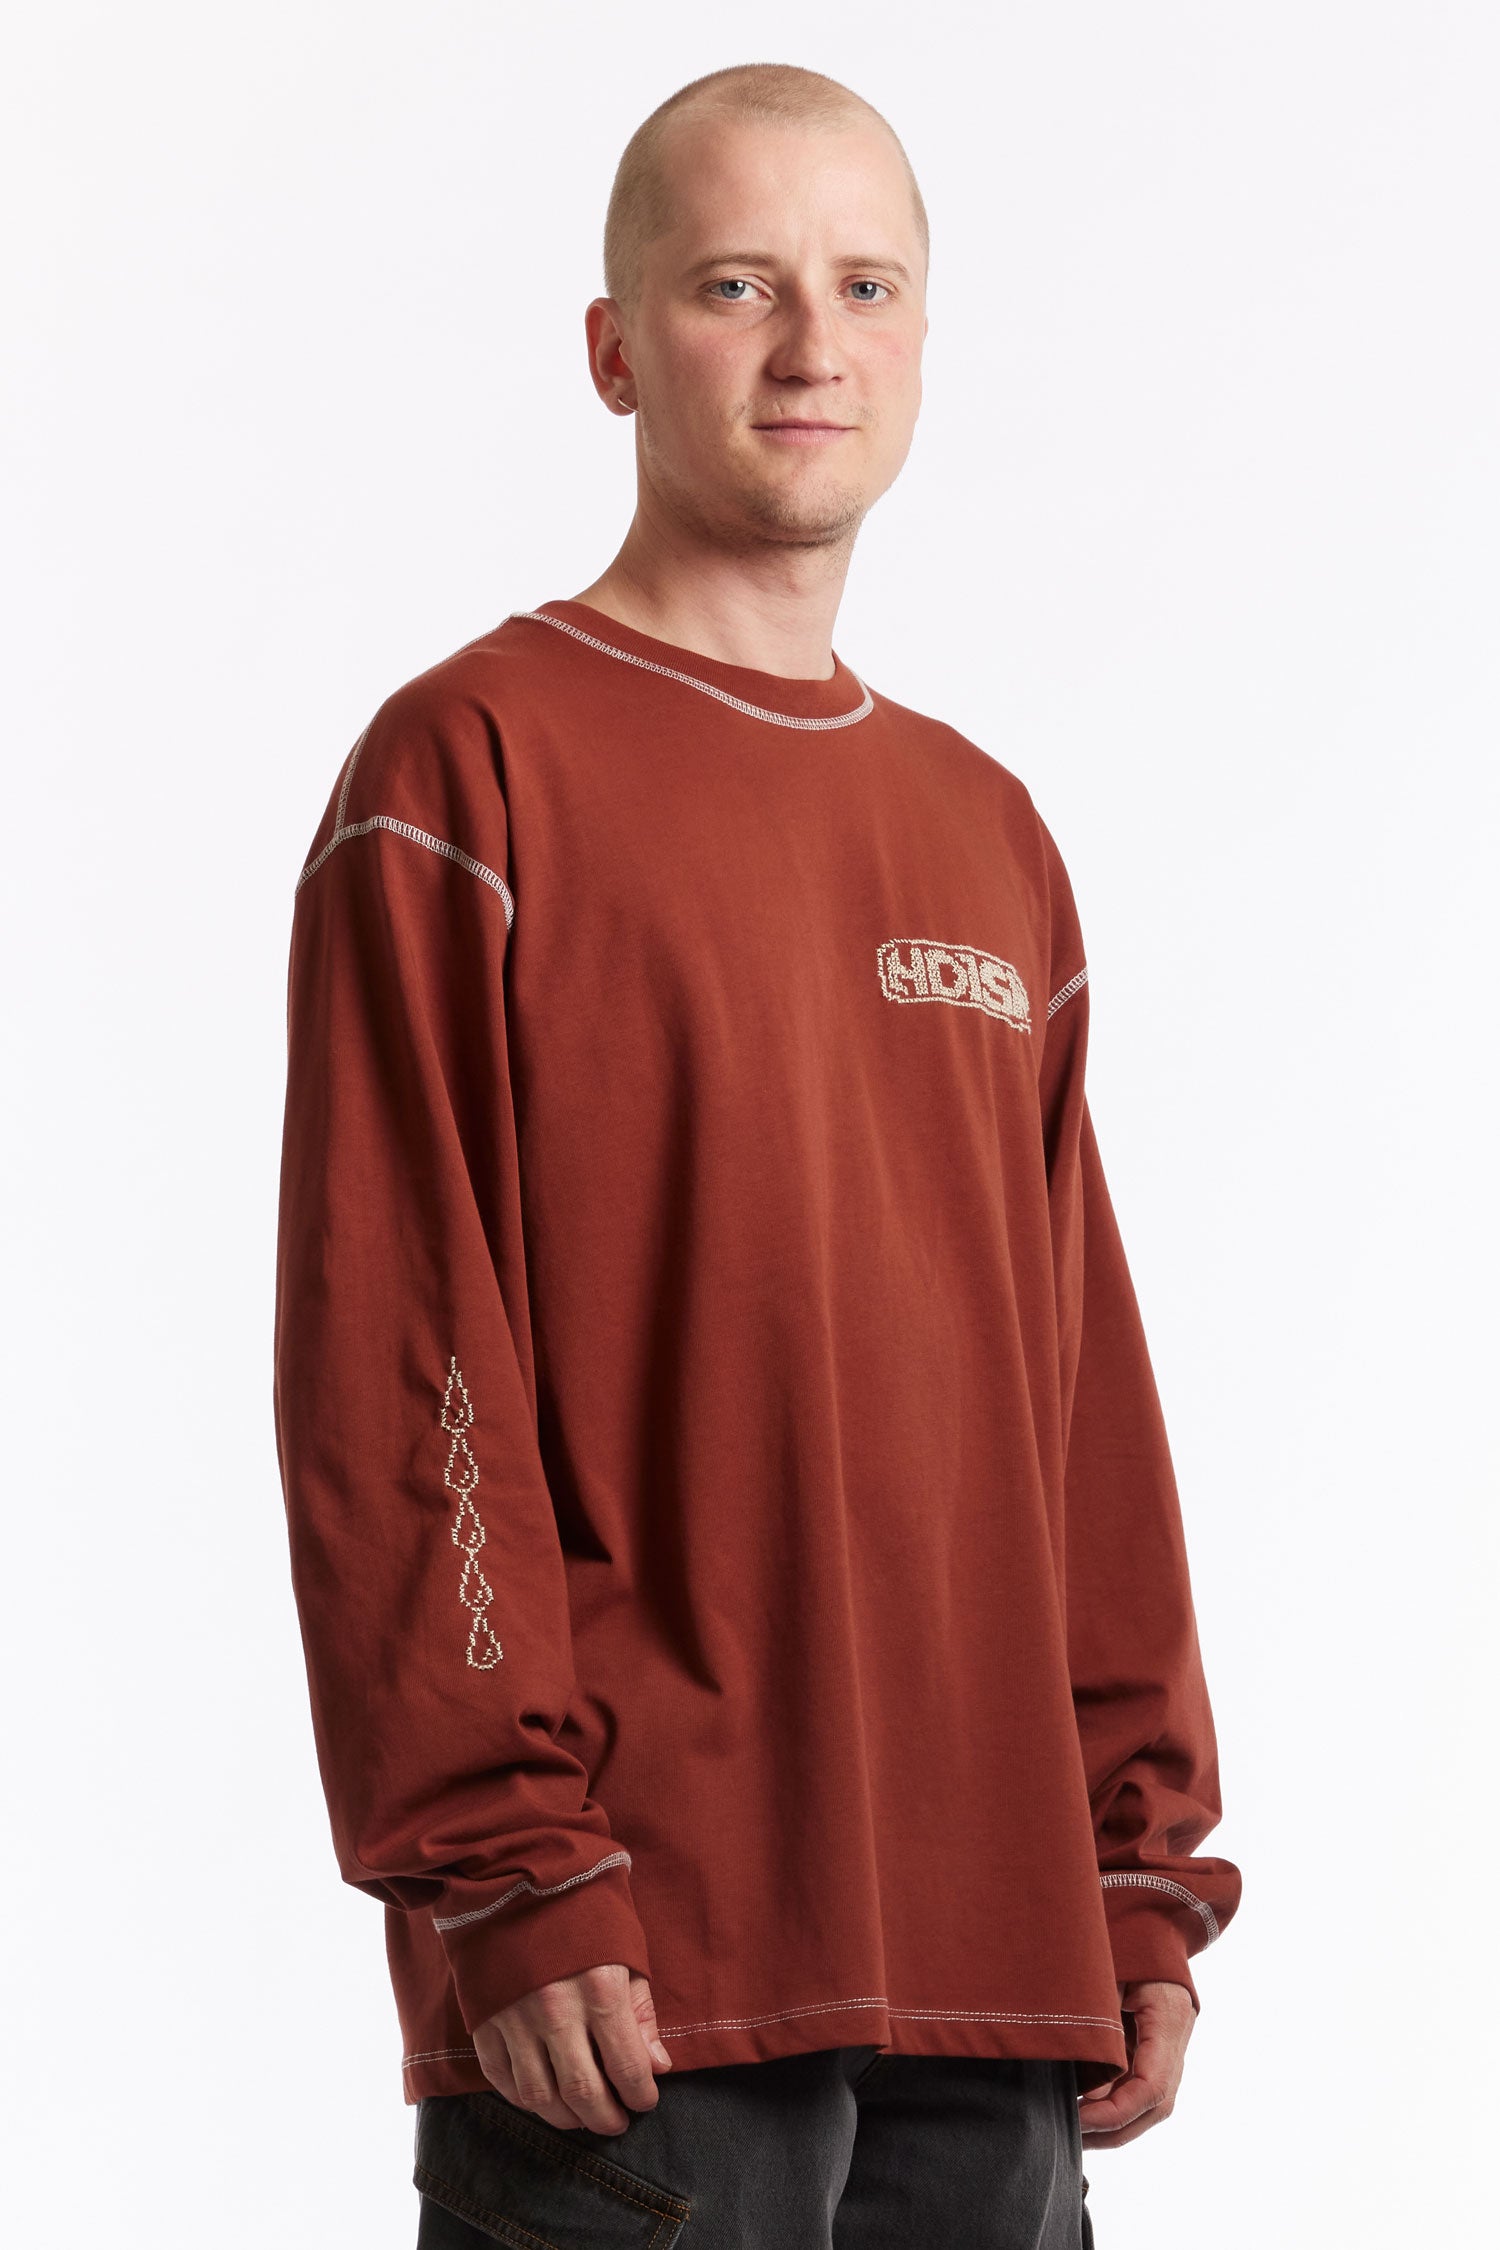 The ADISH - TATREEZ LOGO CONTRAST STITCHED LONG SLEEVE SHIRT BURGUNDY available online with global shipping, and in PAM Stores Melbourne and Sydney.